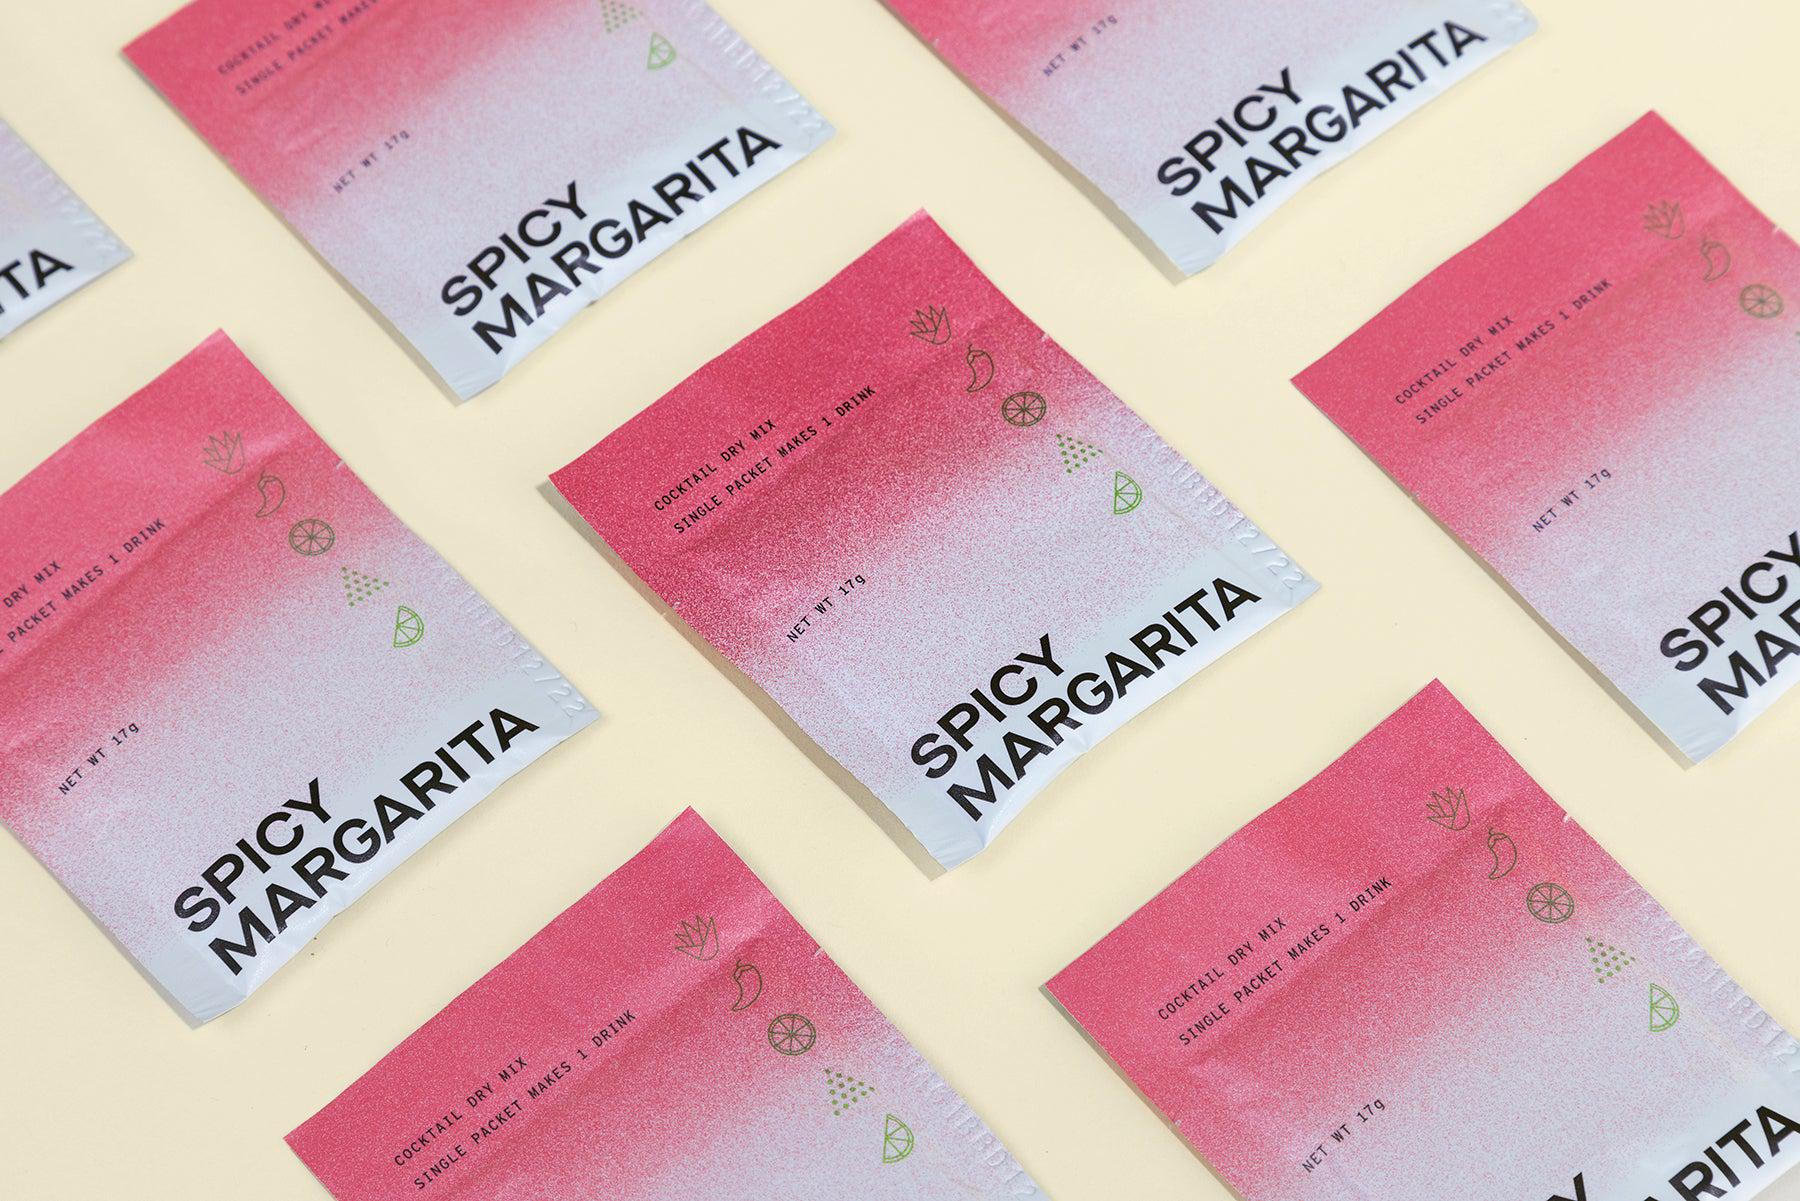 Spicy margarita mix single packets